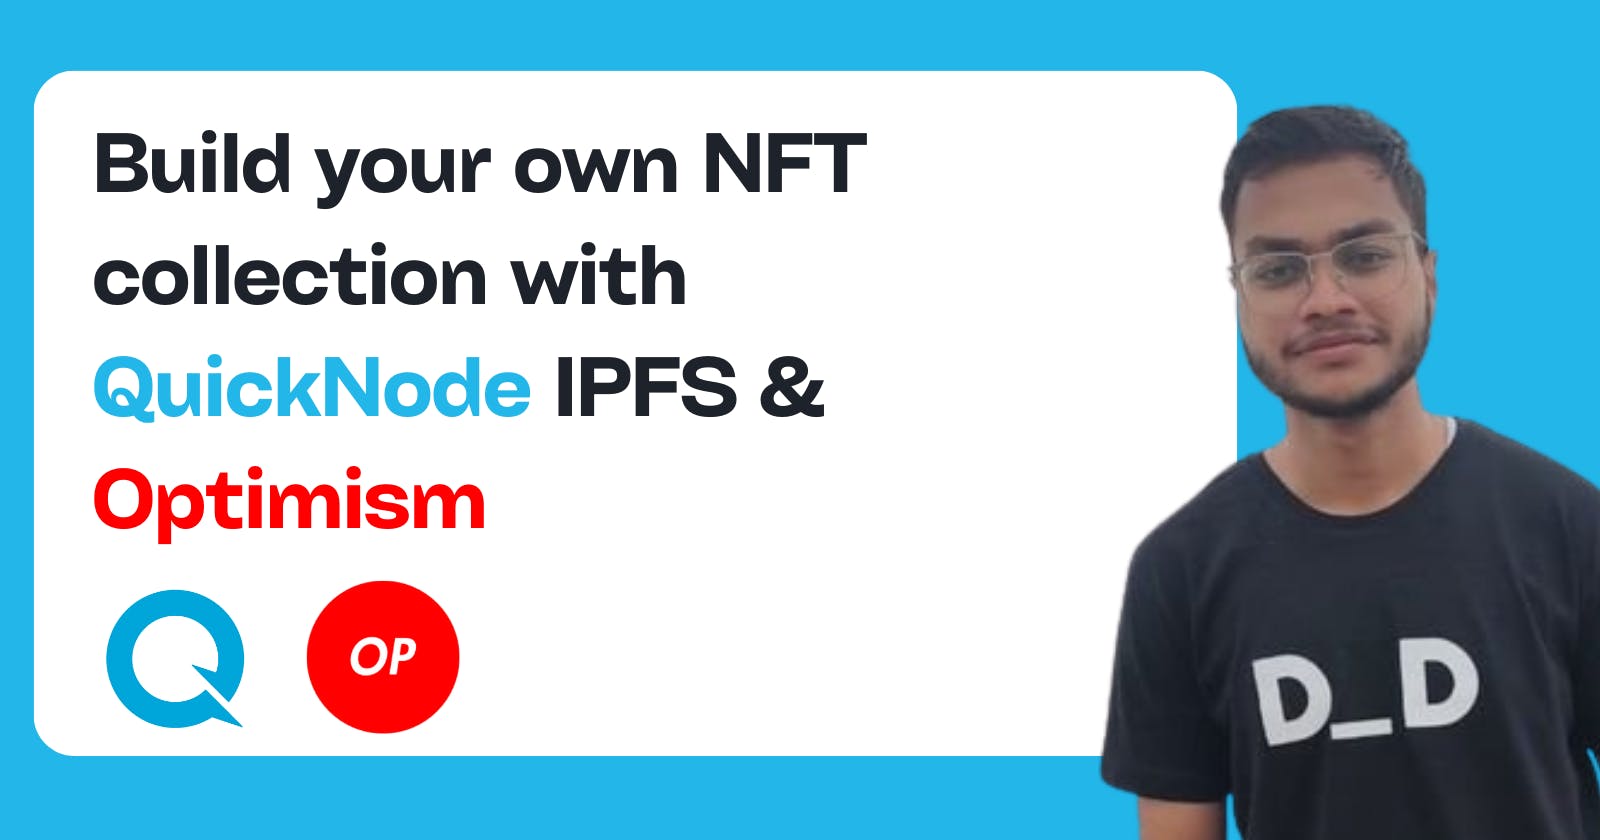 Build your own NFT collection using QuickNode and Optimism